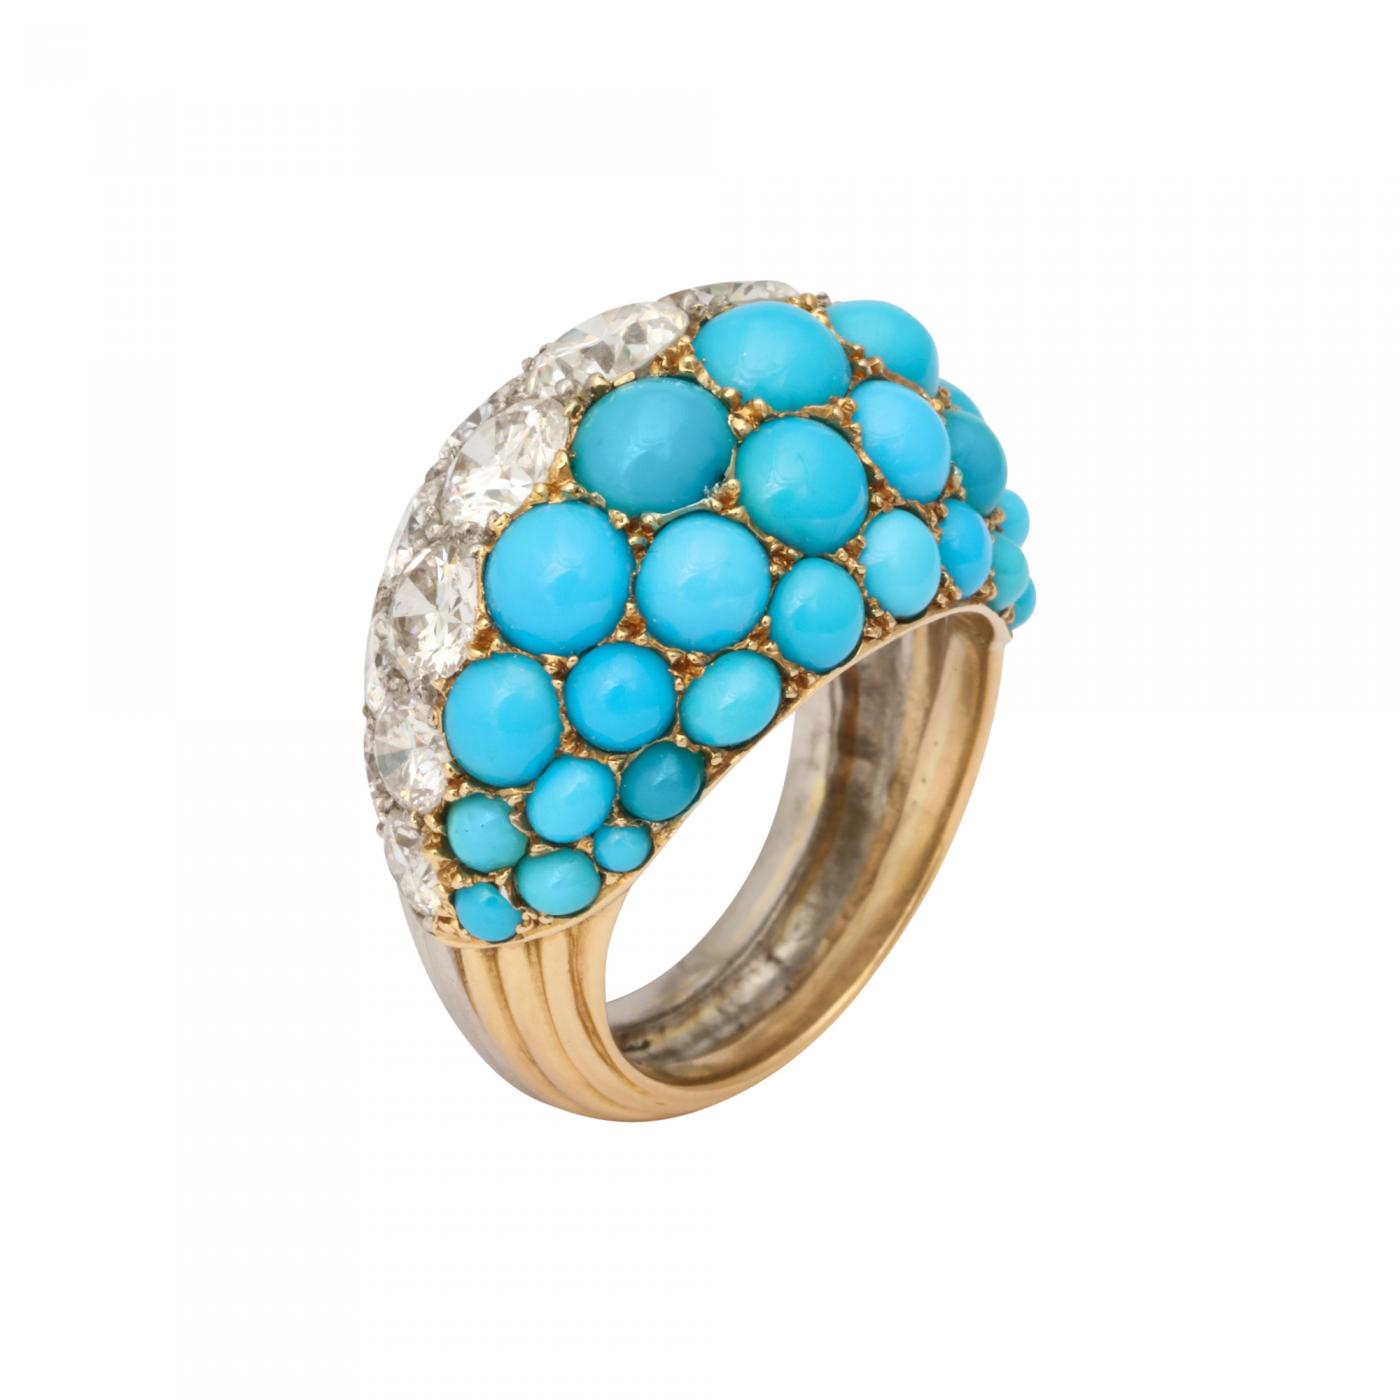 cartier turquoise jewelry